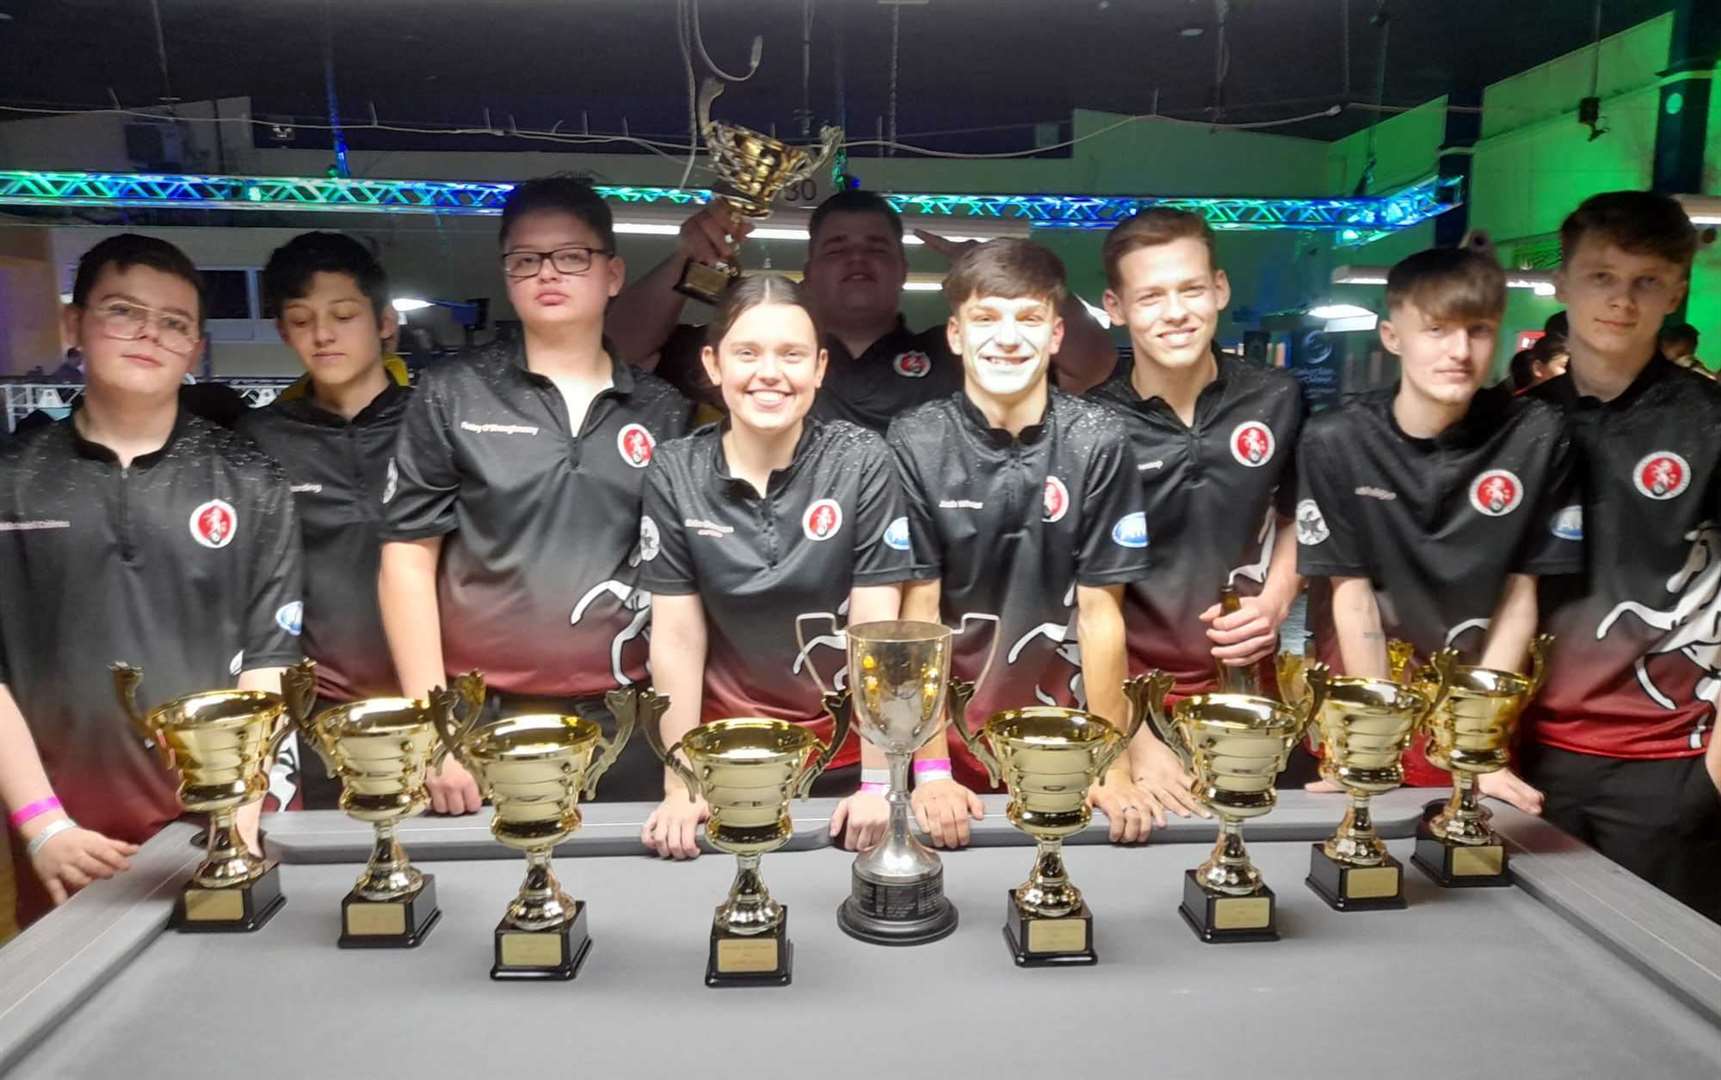 Kent's under-18 national pool champions from left, Michael Cairns, Alfie Harding, Finlay O'Shaugnessy, Erin Gannon, Chase East, Josh Wheeler, Charlie Jessup, Alfie Rogers and James Goldsmith